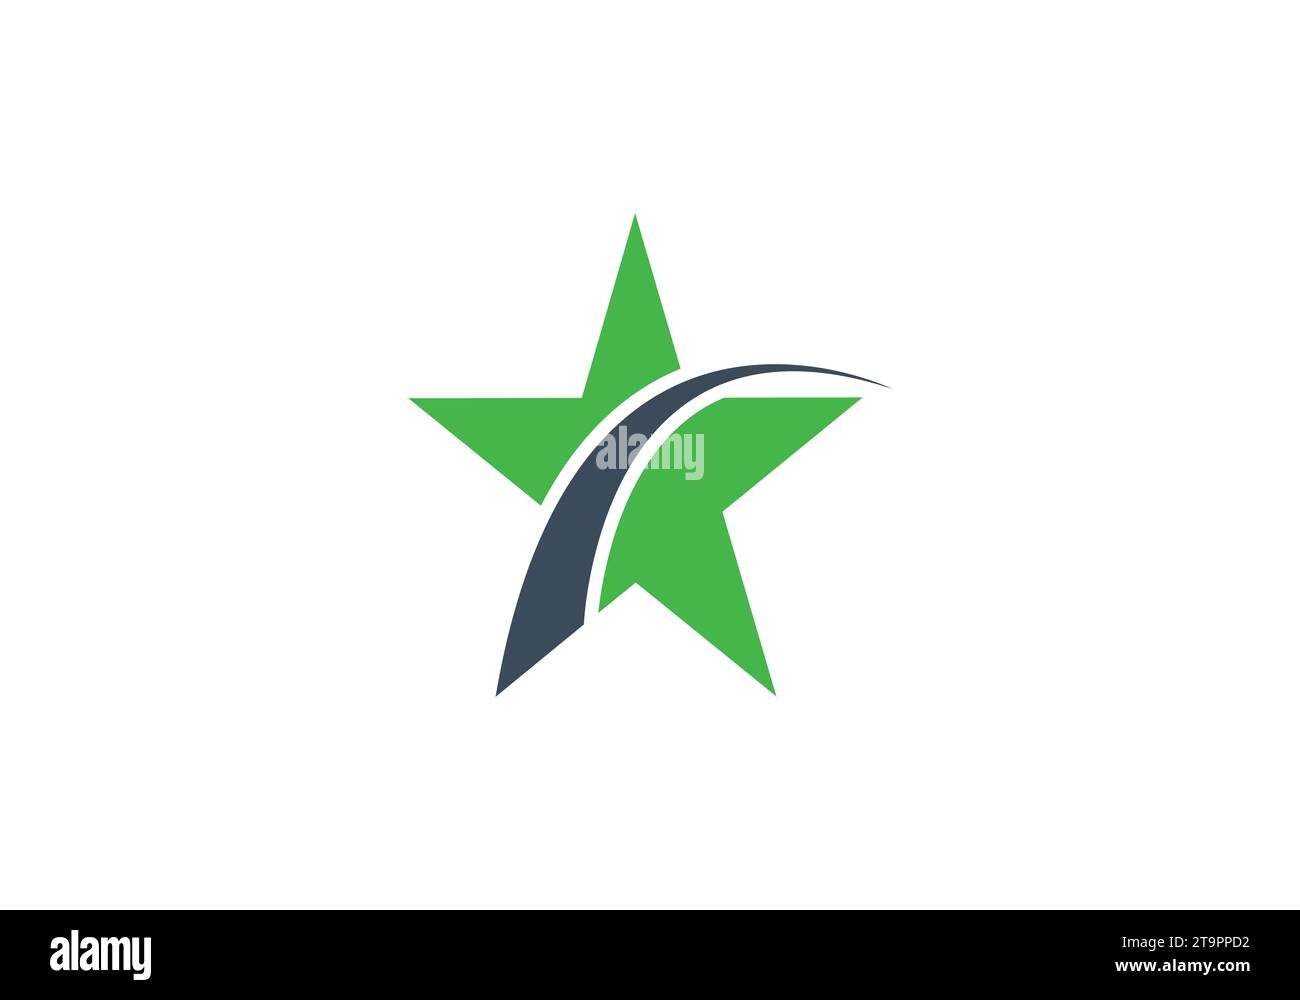 Star icon and symbol vector illustration design. Suitable for any purpose. Stock Vector